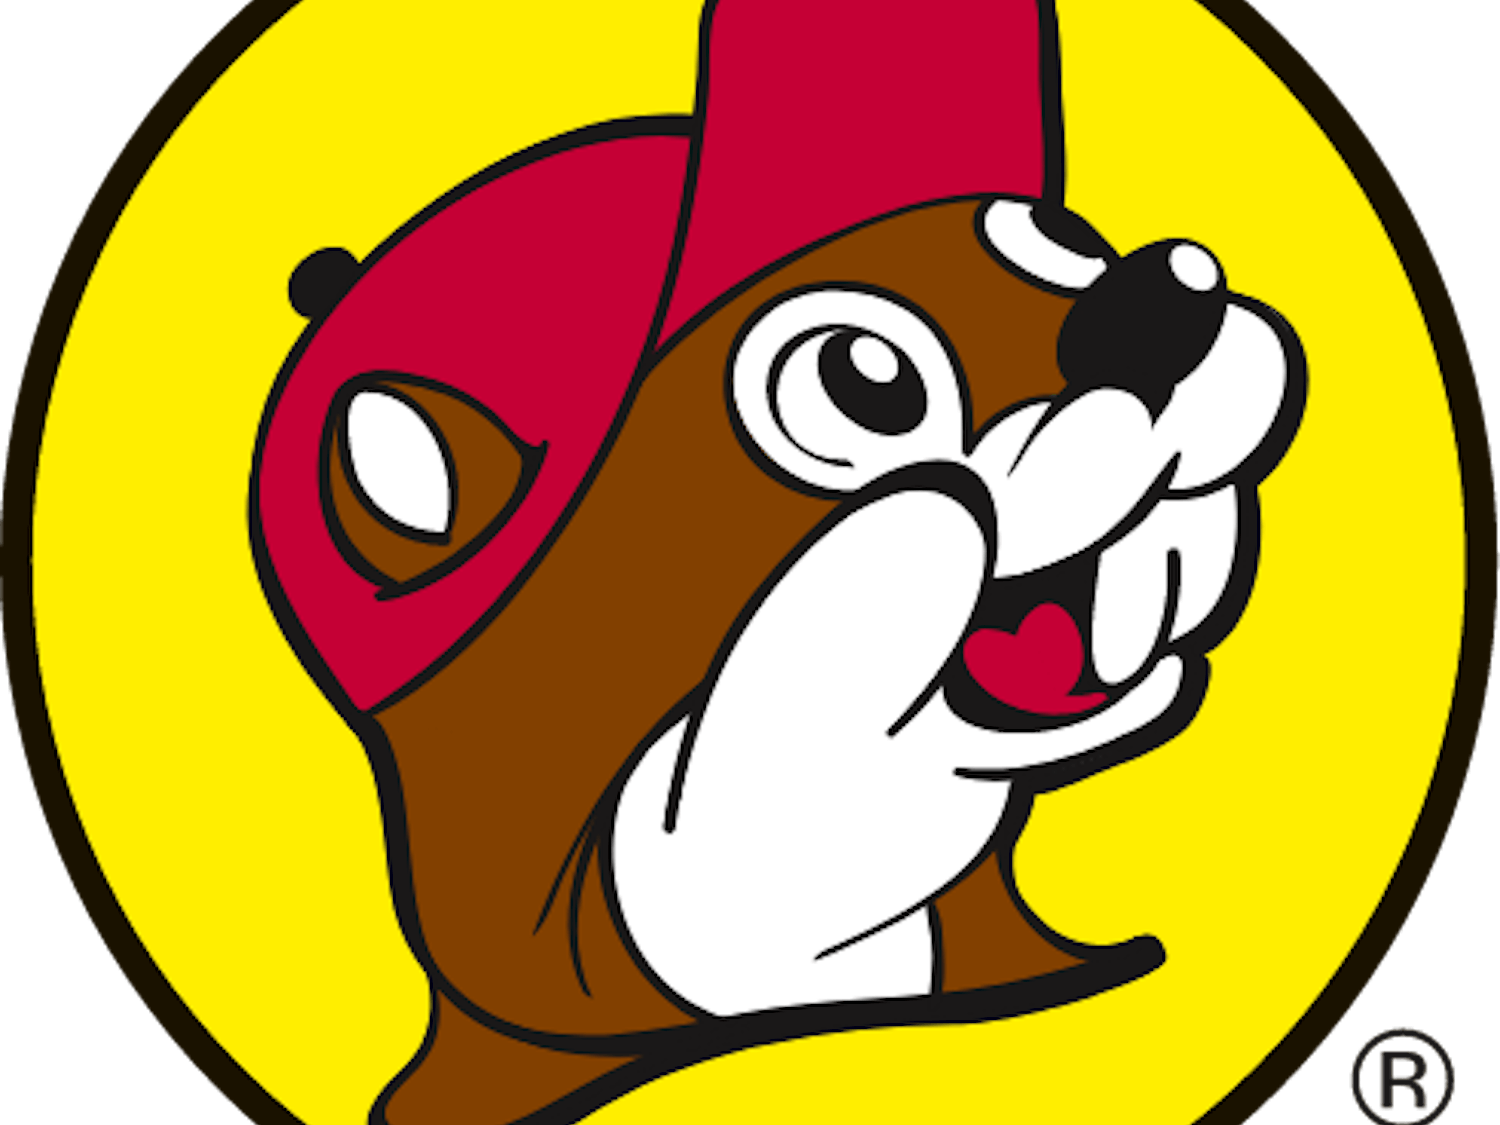 bucee-icon.png